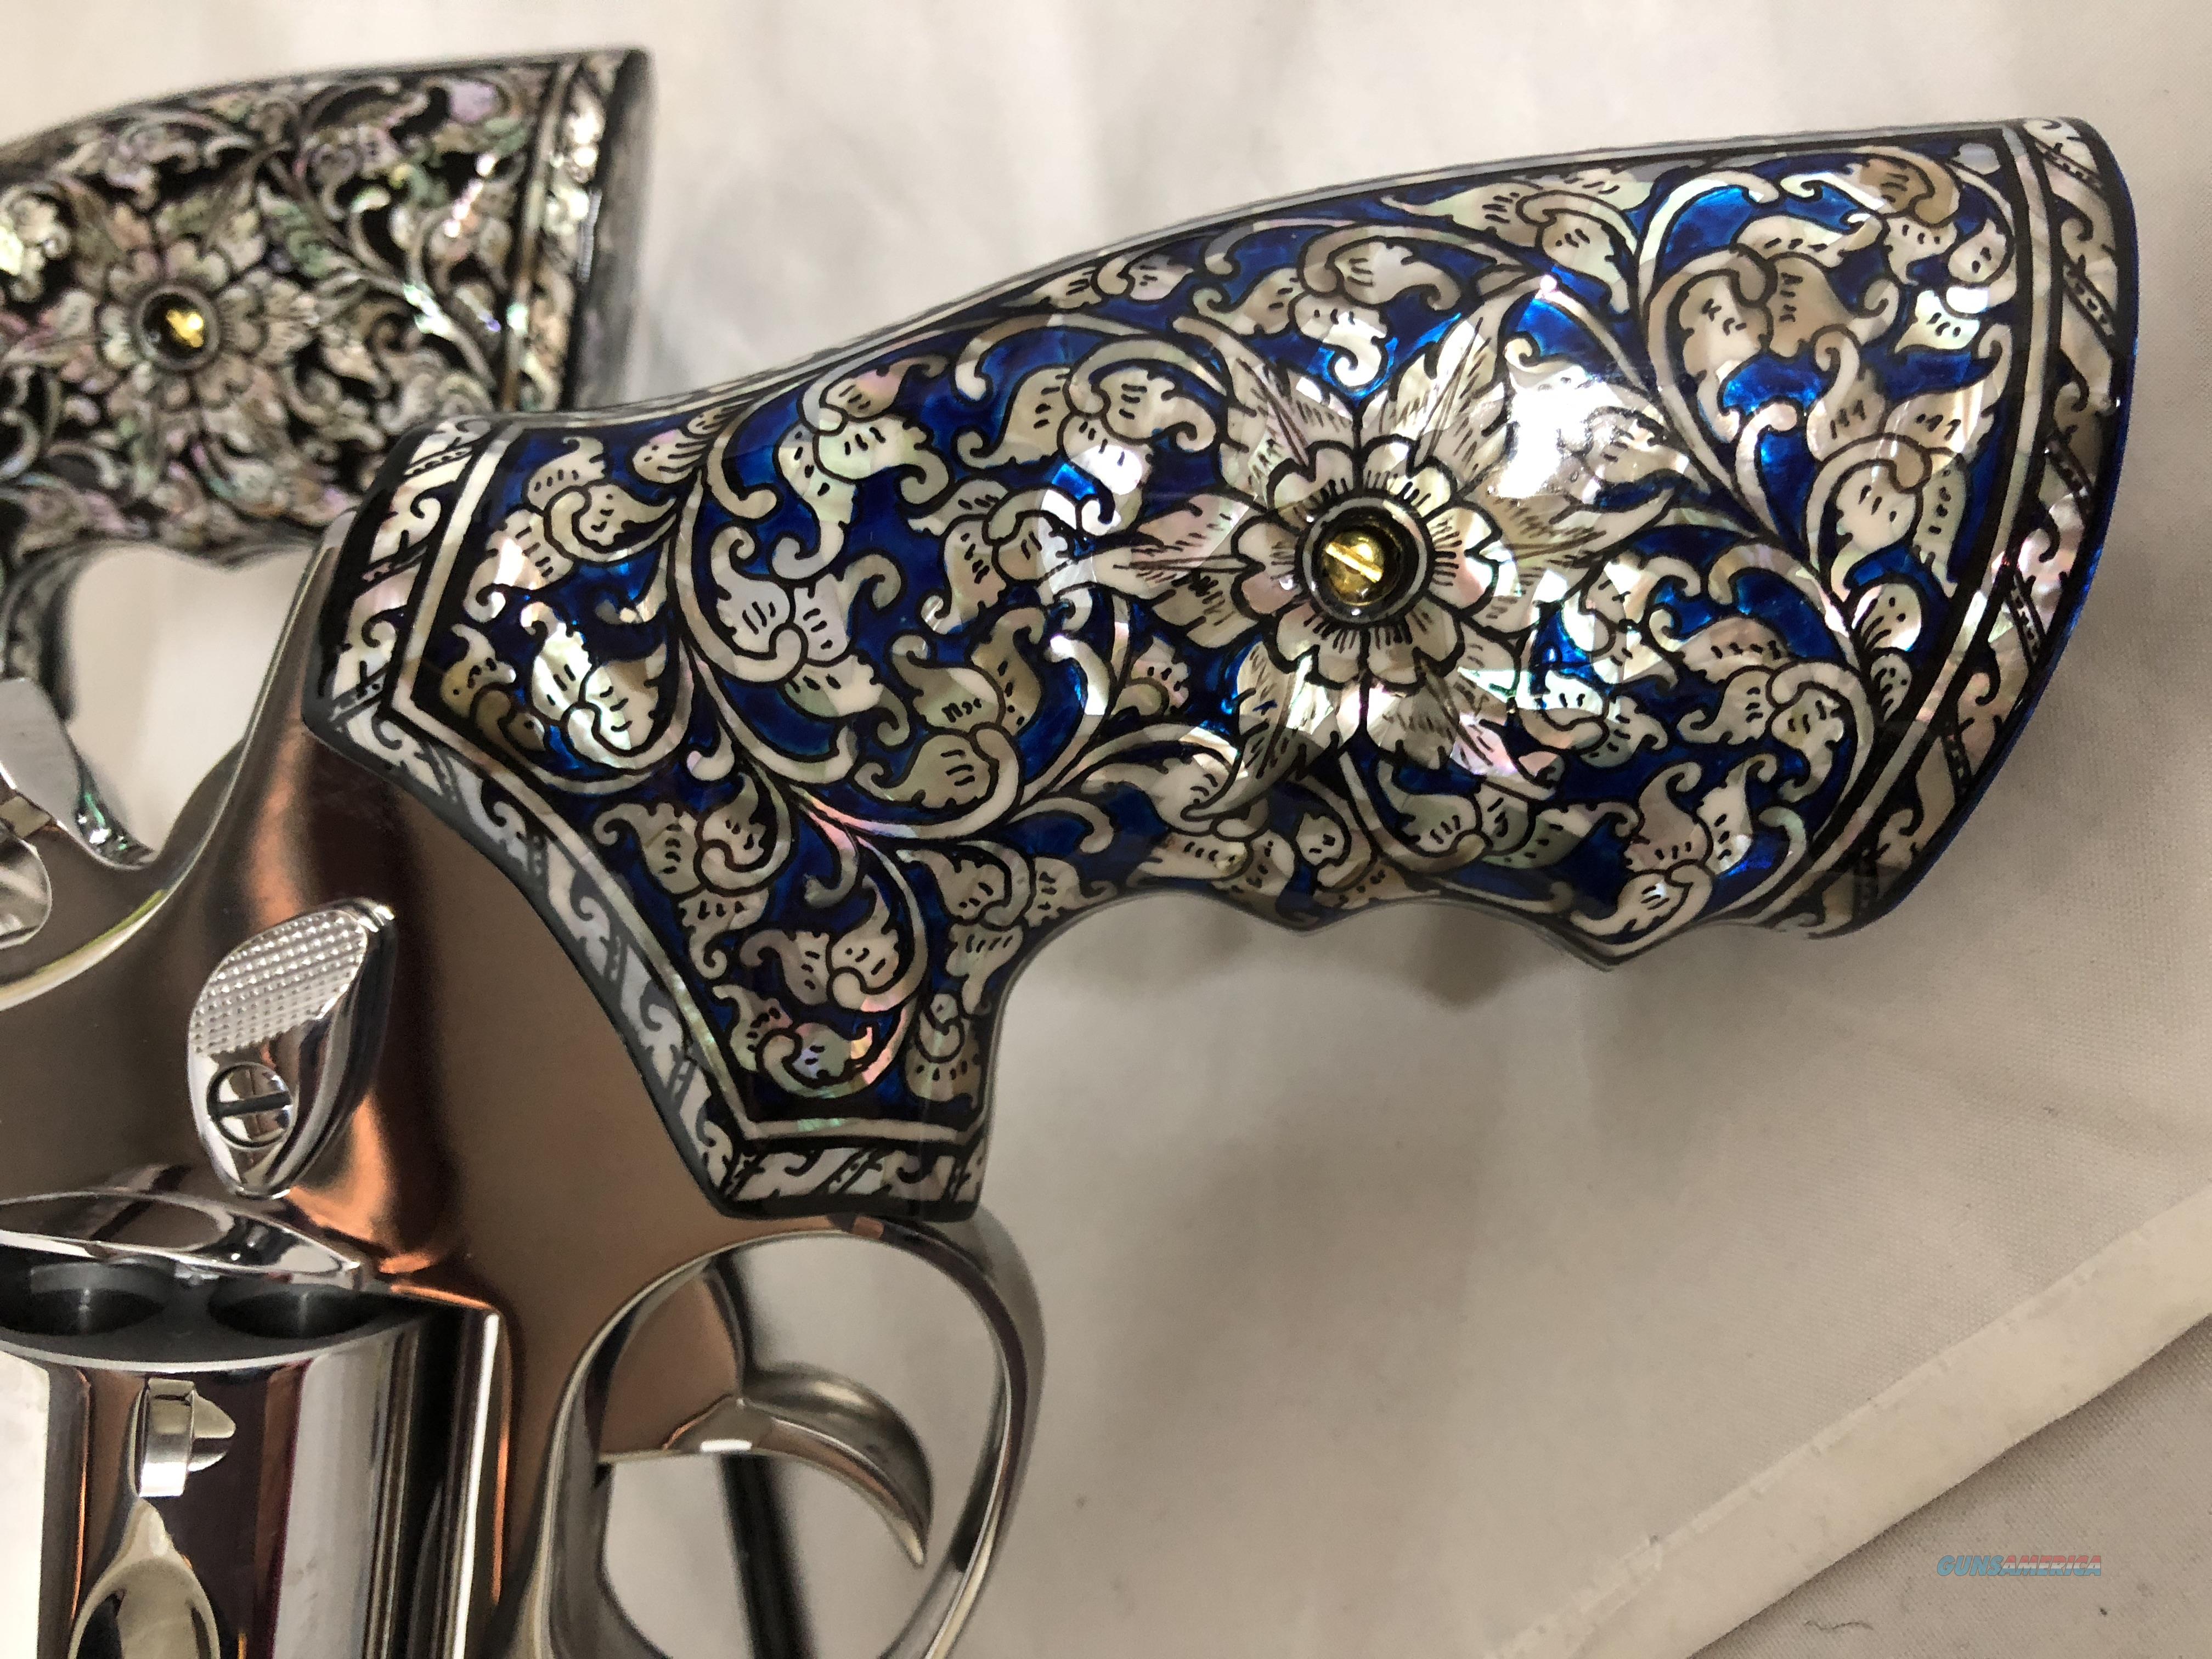 taurus firearms born date serial number search